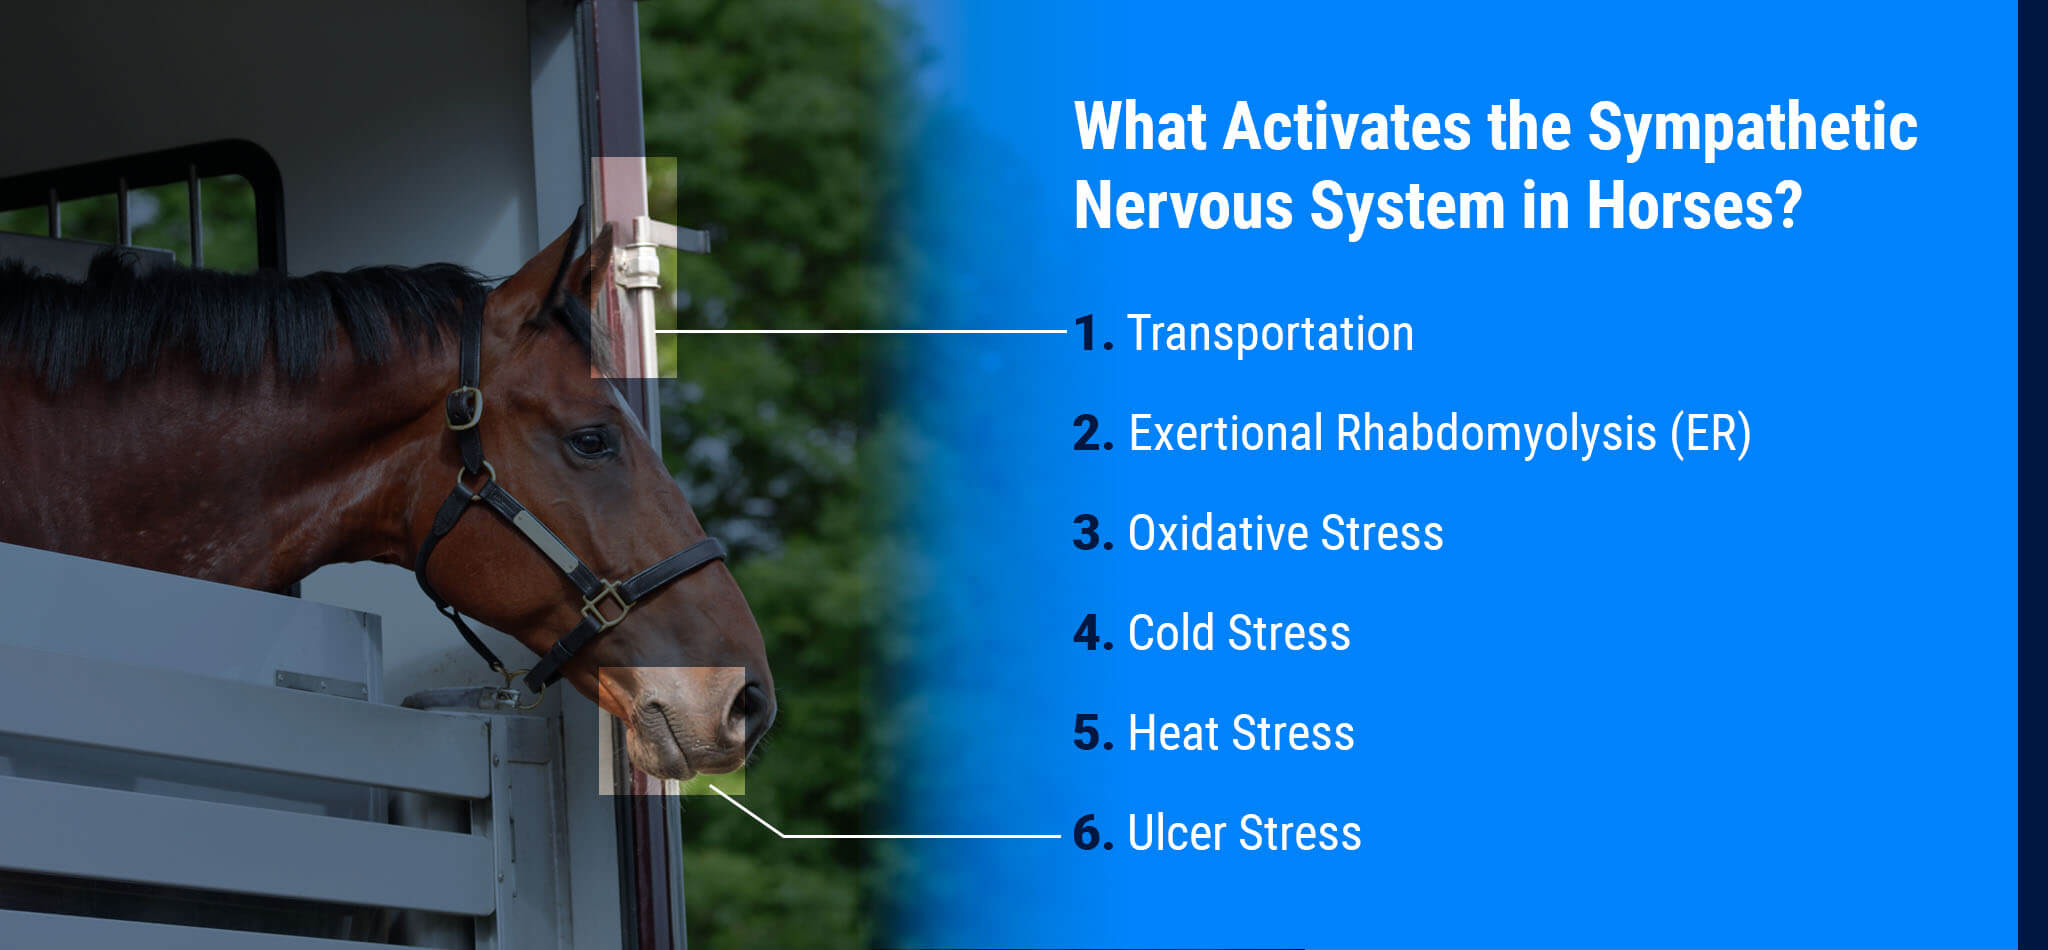 What Activates the Sympathetic Nervous System in Horses?